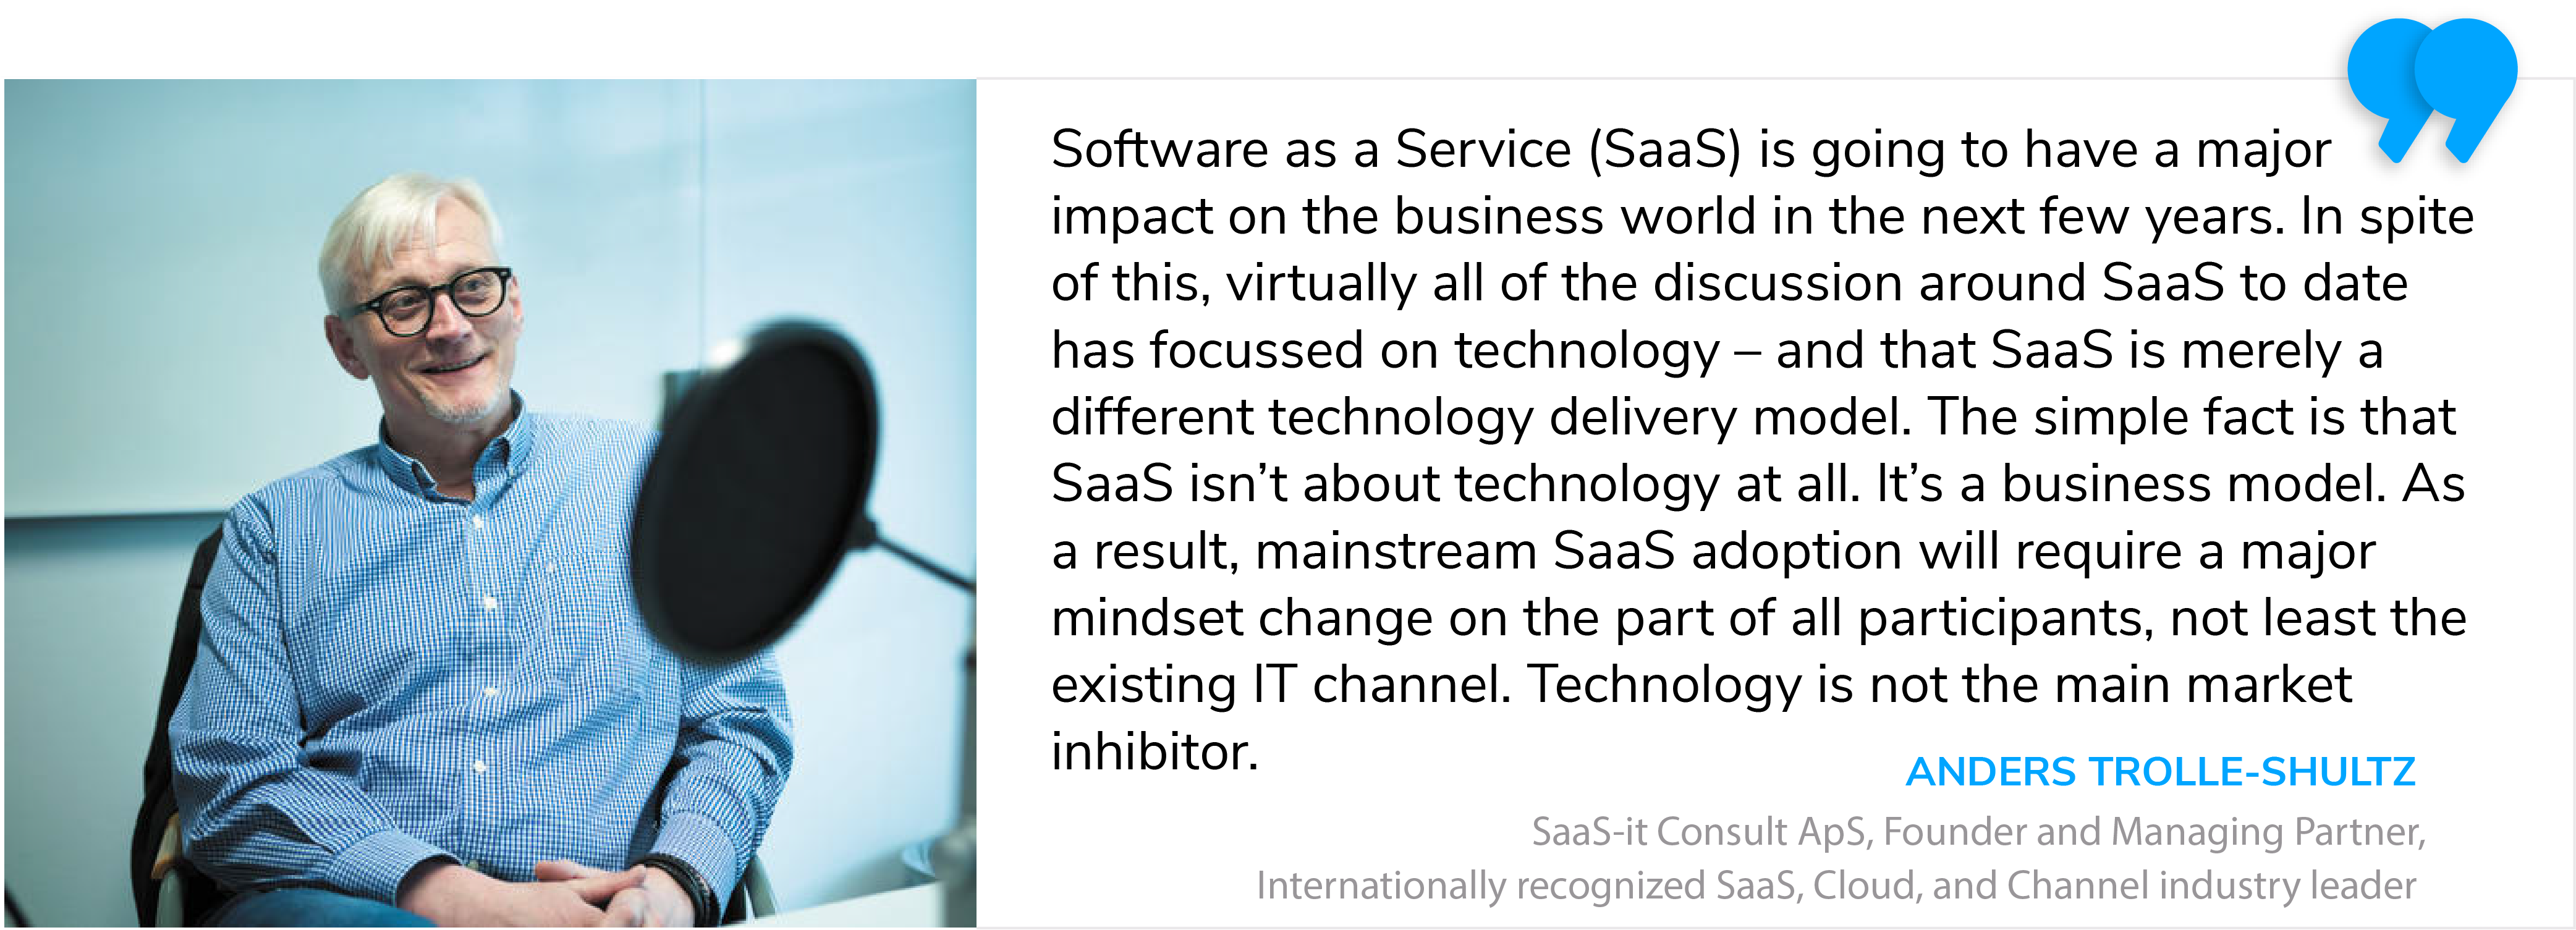 Shultz about SaaS business model